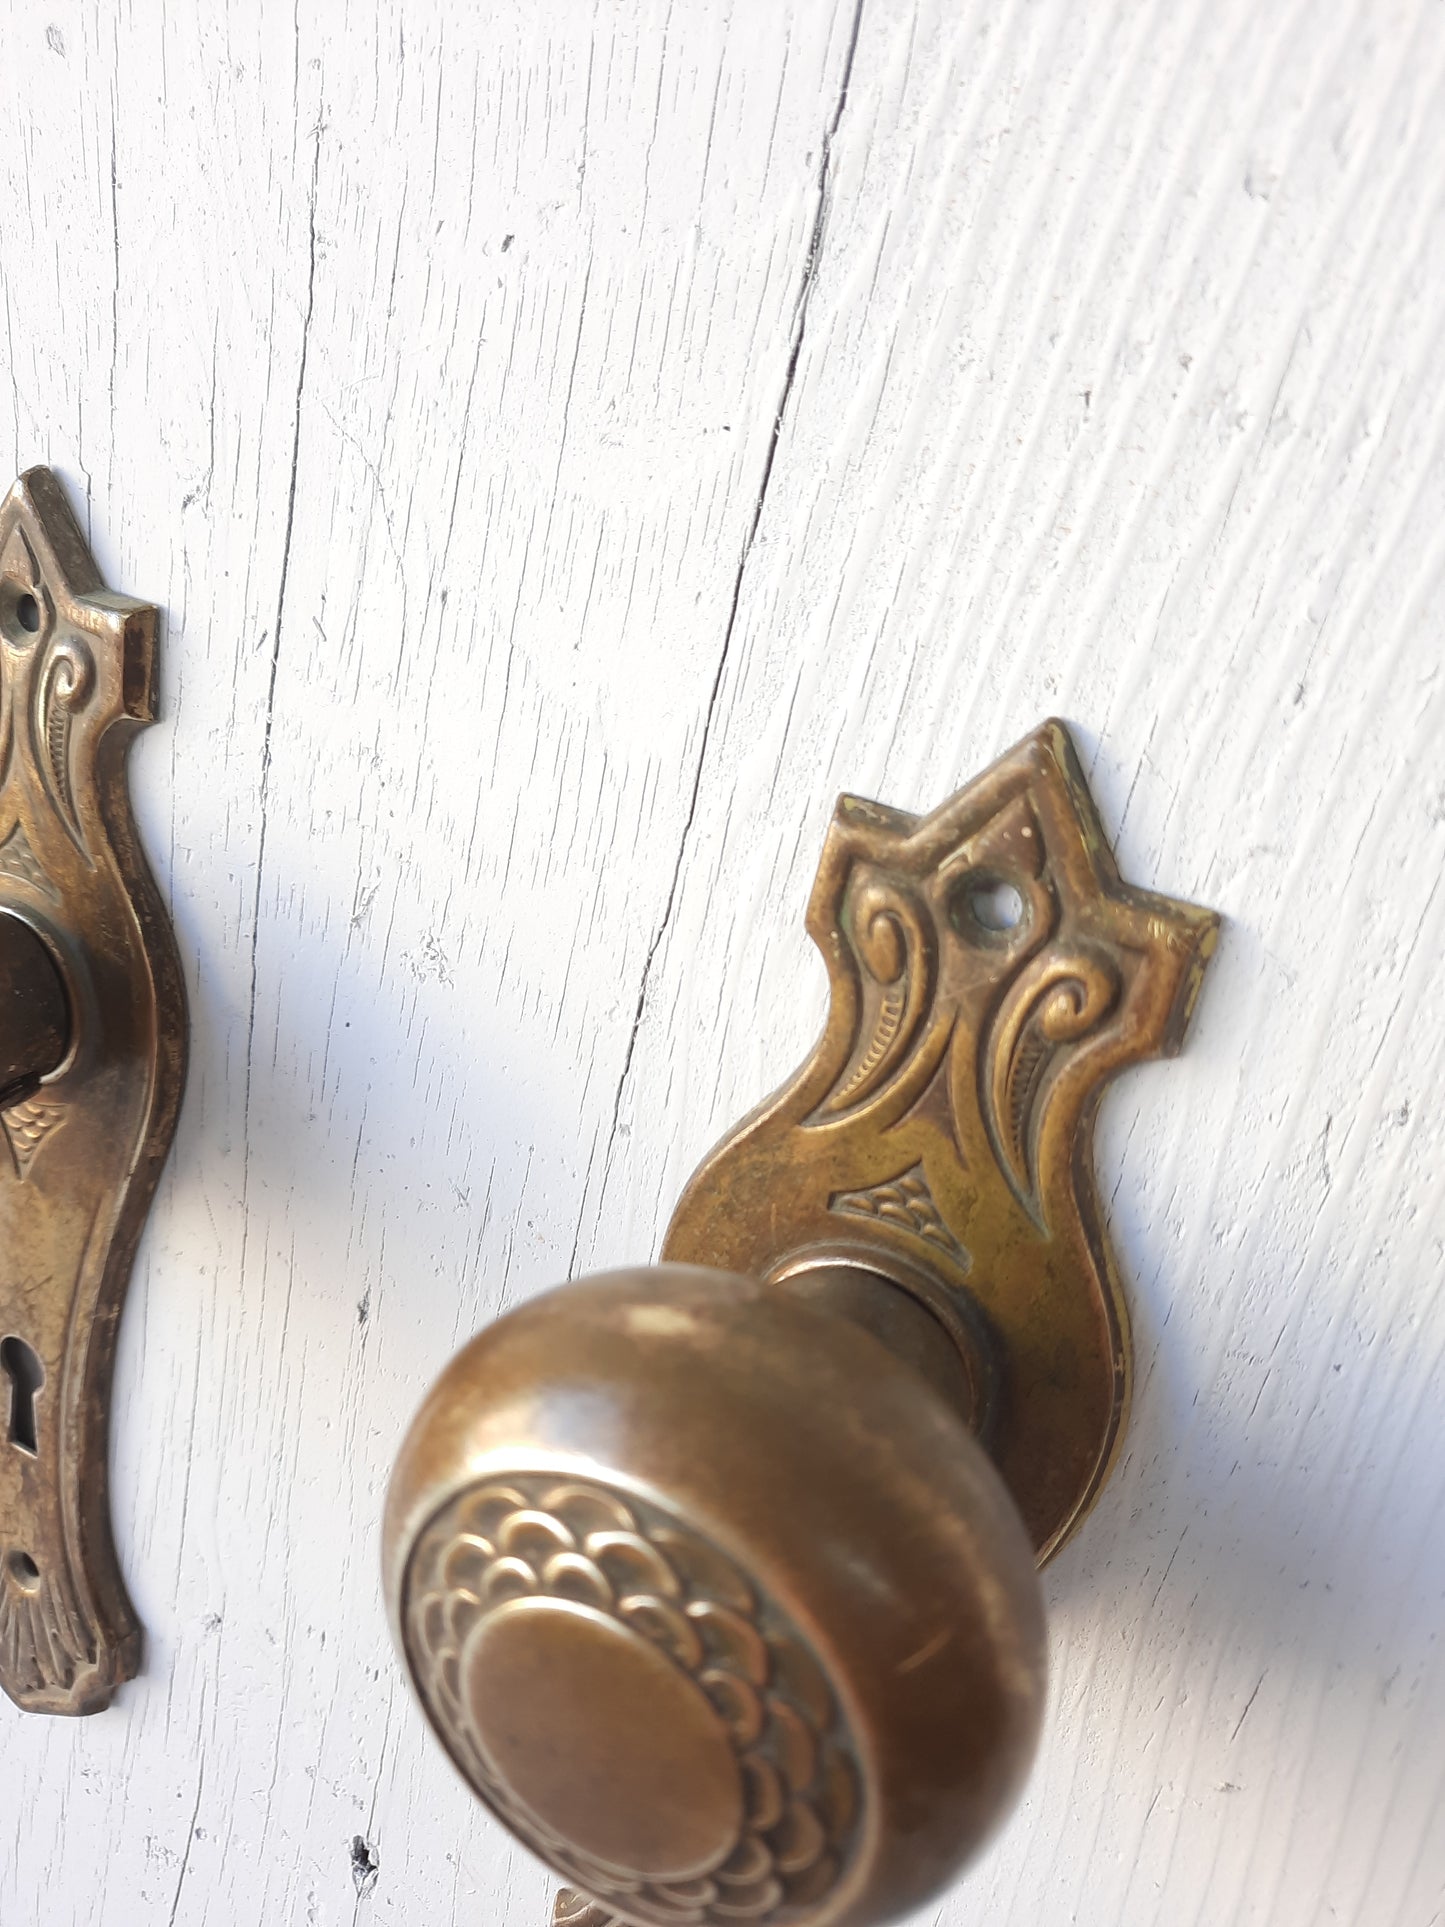 Art Deco Hardware Set Knobs and Backplates, Deco Doorknobs and Plates, Brass Escutcheons 112802